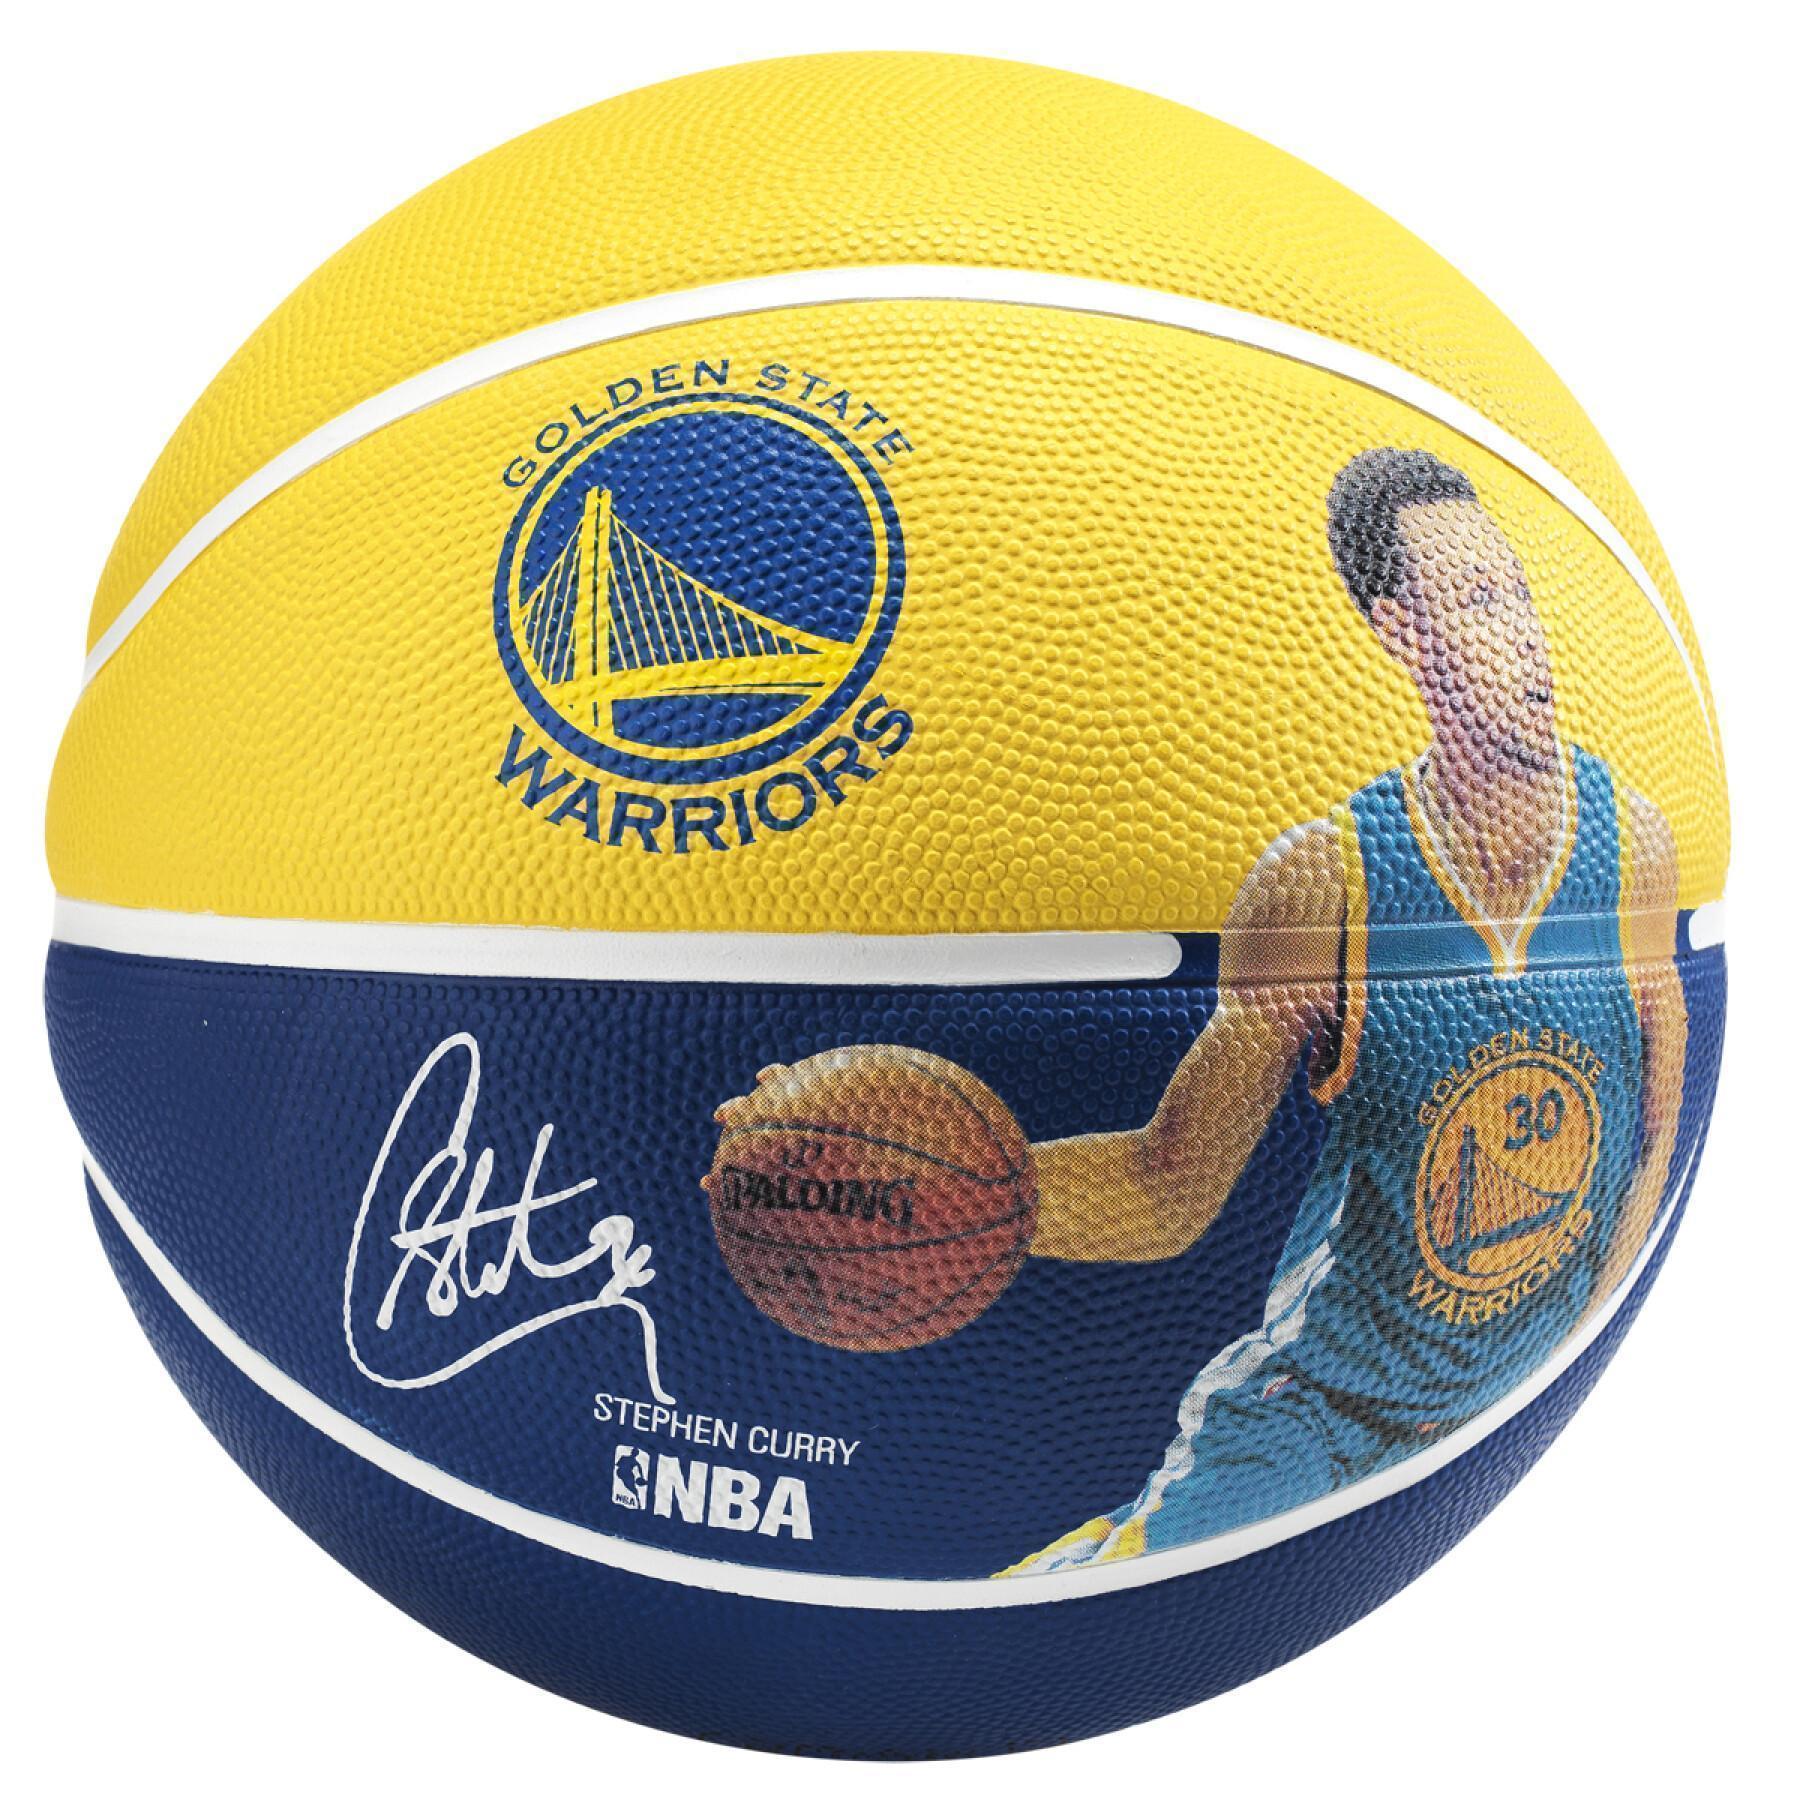 Palloncino Spalding Player Stephen Curry